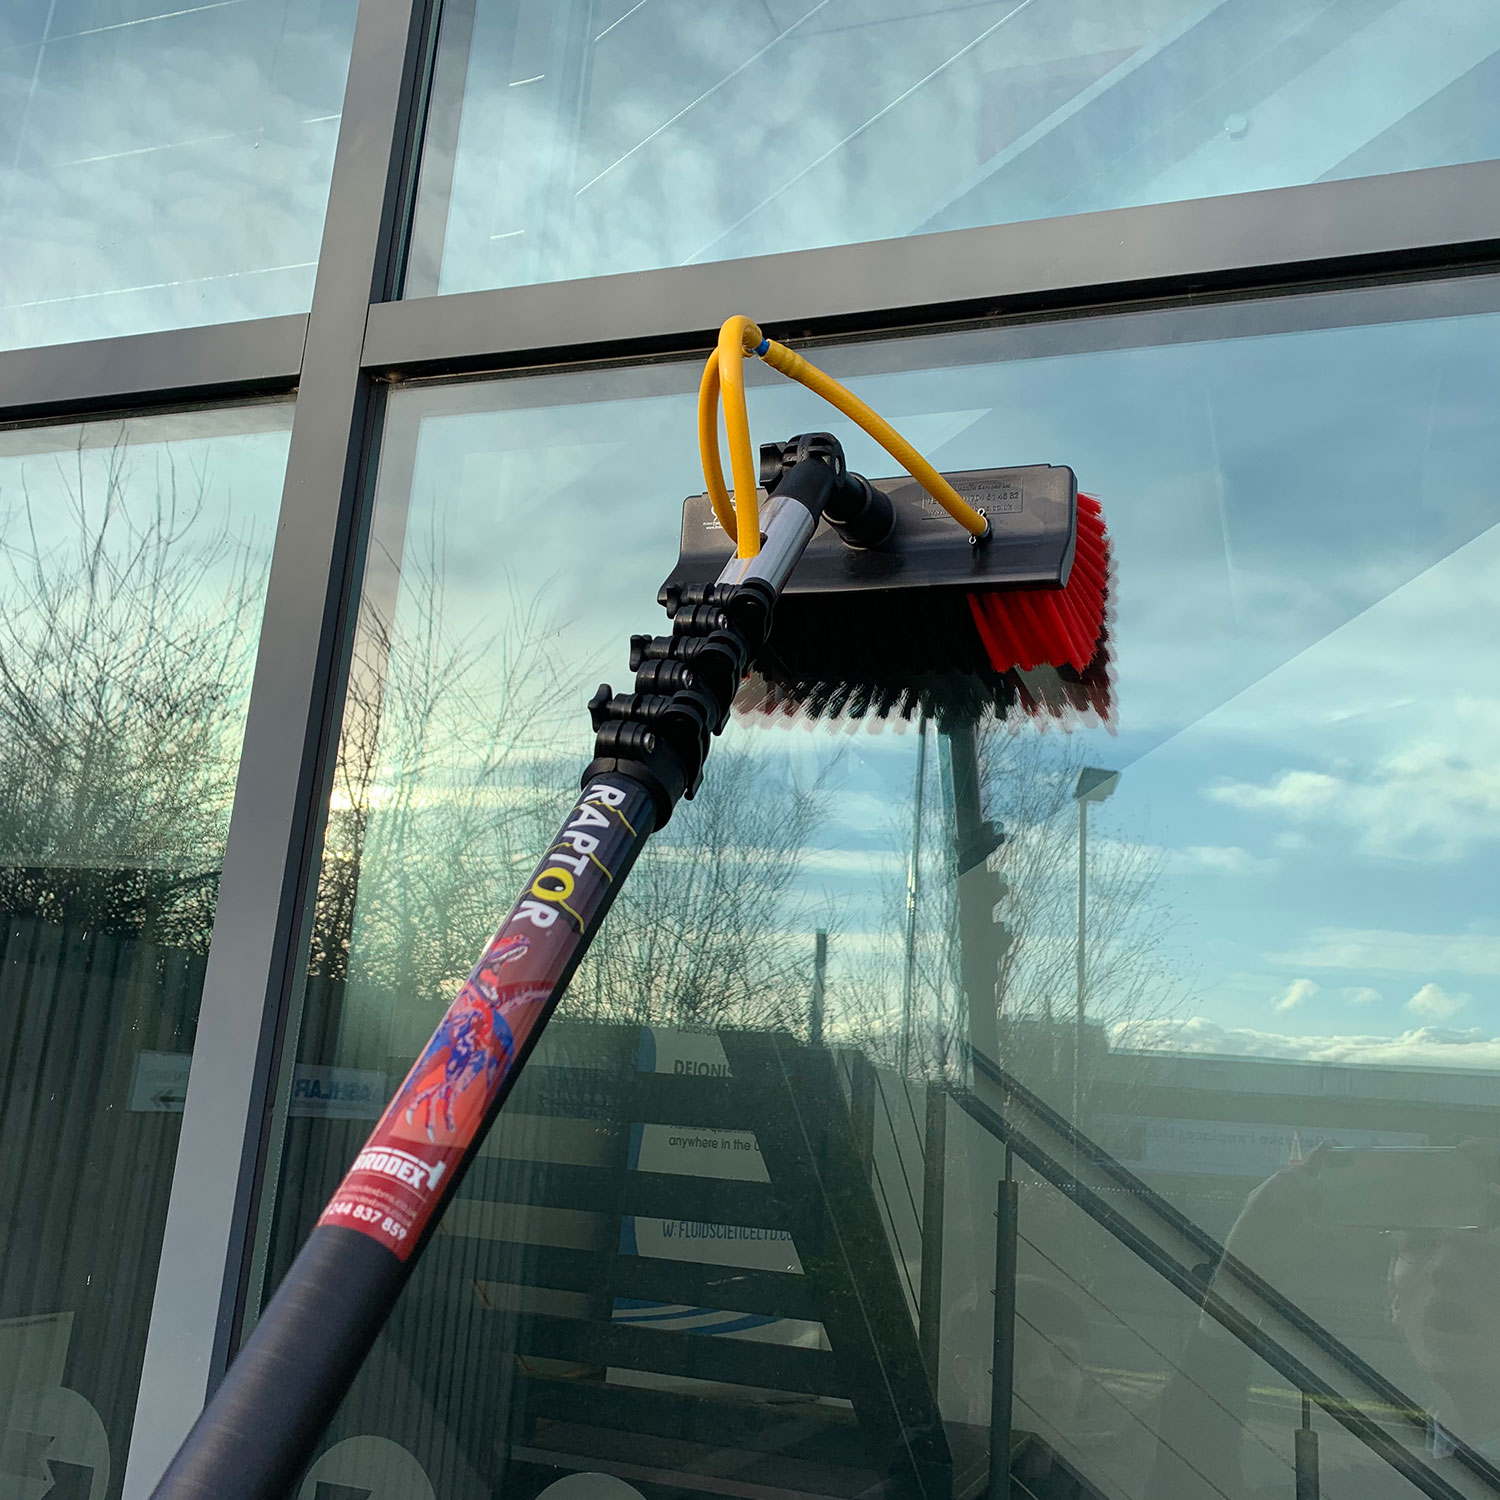 window cleaning pole, water fed pole,Carbon Fibre Water Fed Pole, Carbon Fibre Telescopic Pole, Window Cleaning Pole, RAPTOR Pole, Telescopic Cleaning Pole, Window Cleaning Equipment, Carbon Pole, Window Cleaning Brush